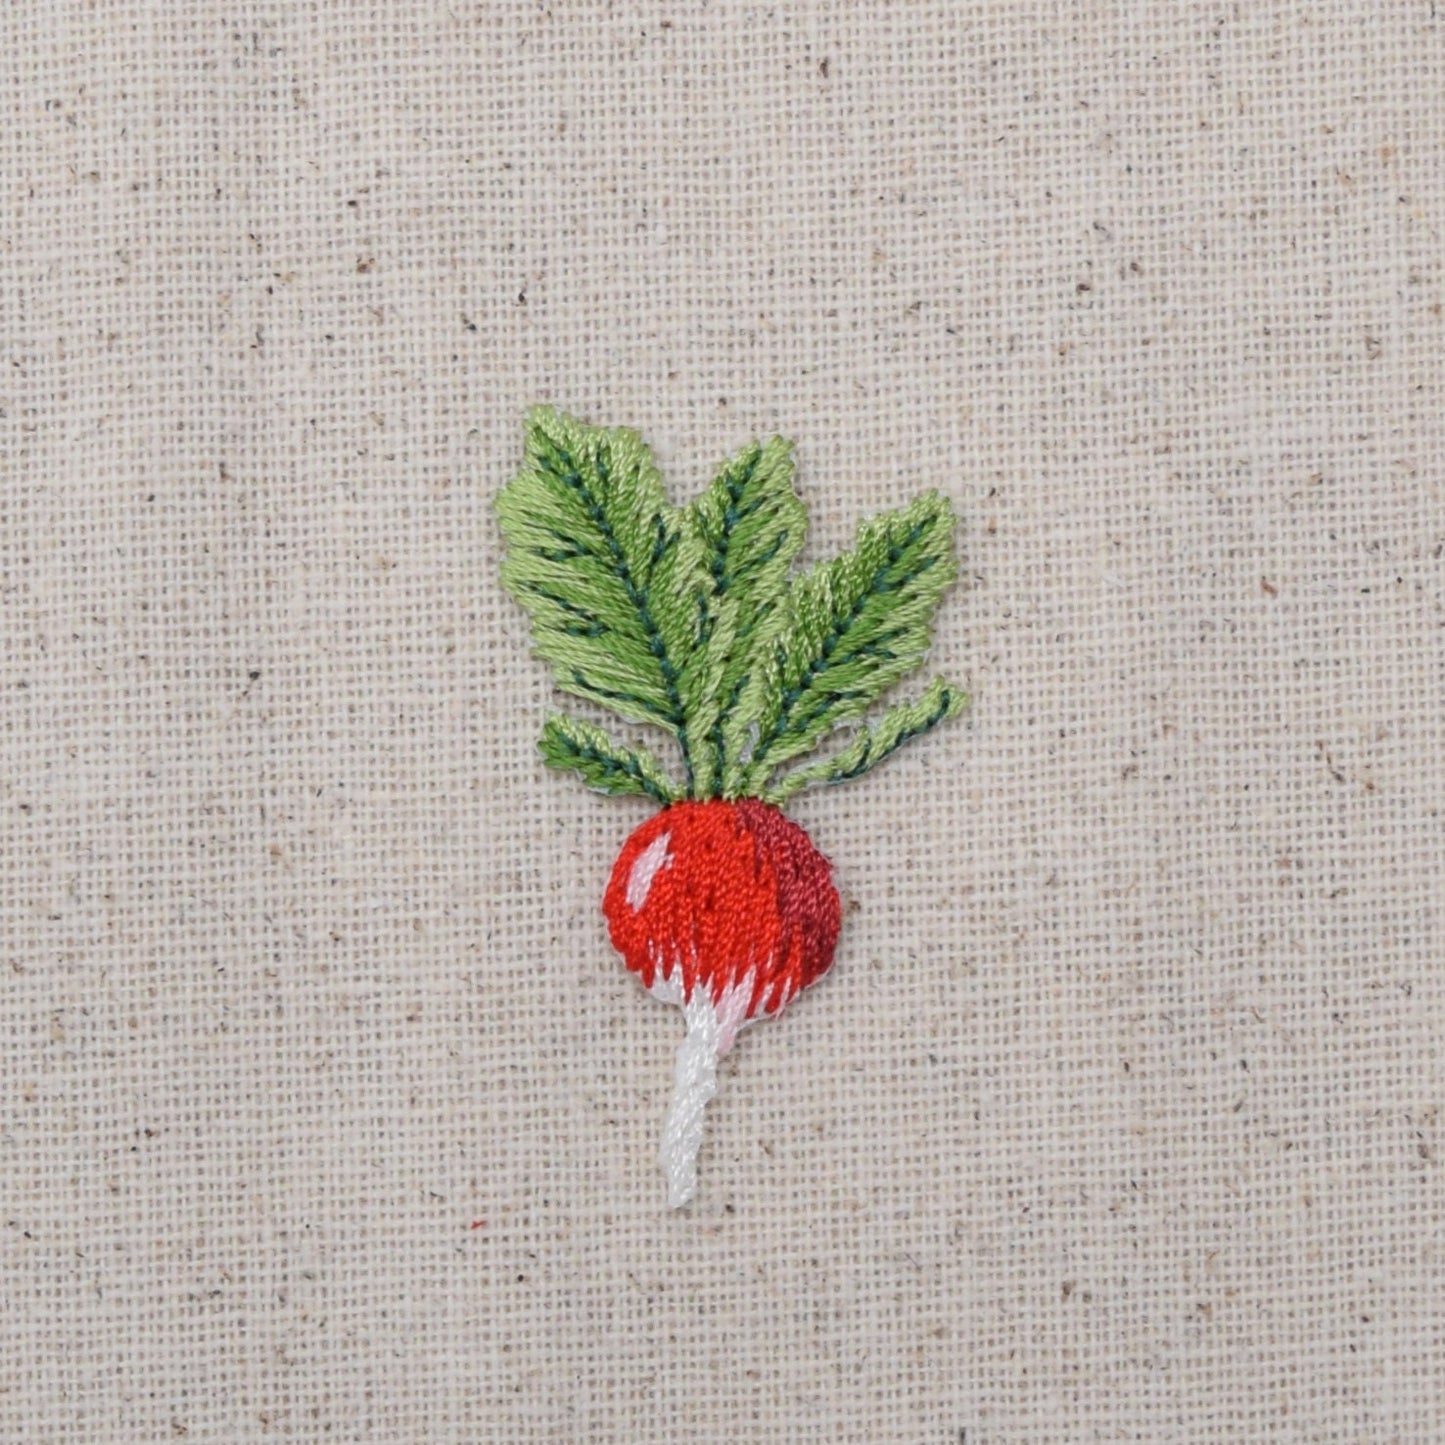 Turnip - Radish - Garden Vegetable - Embroidered Patch - Iron on Applique - 150367-A